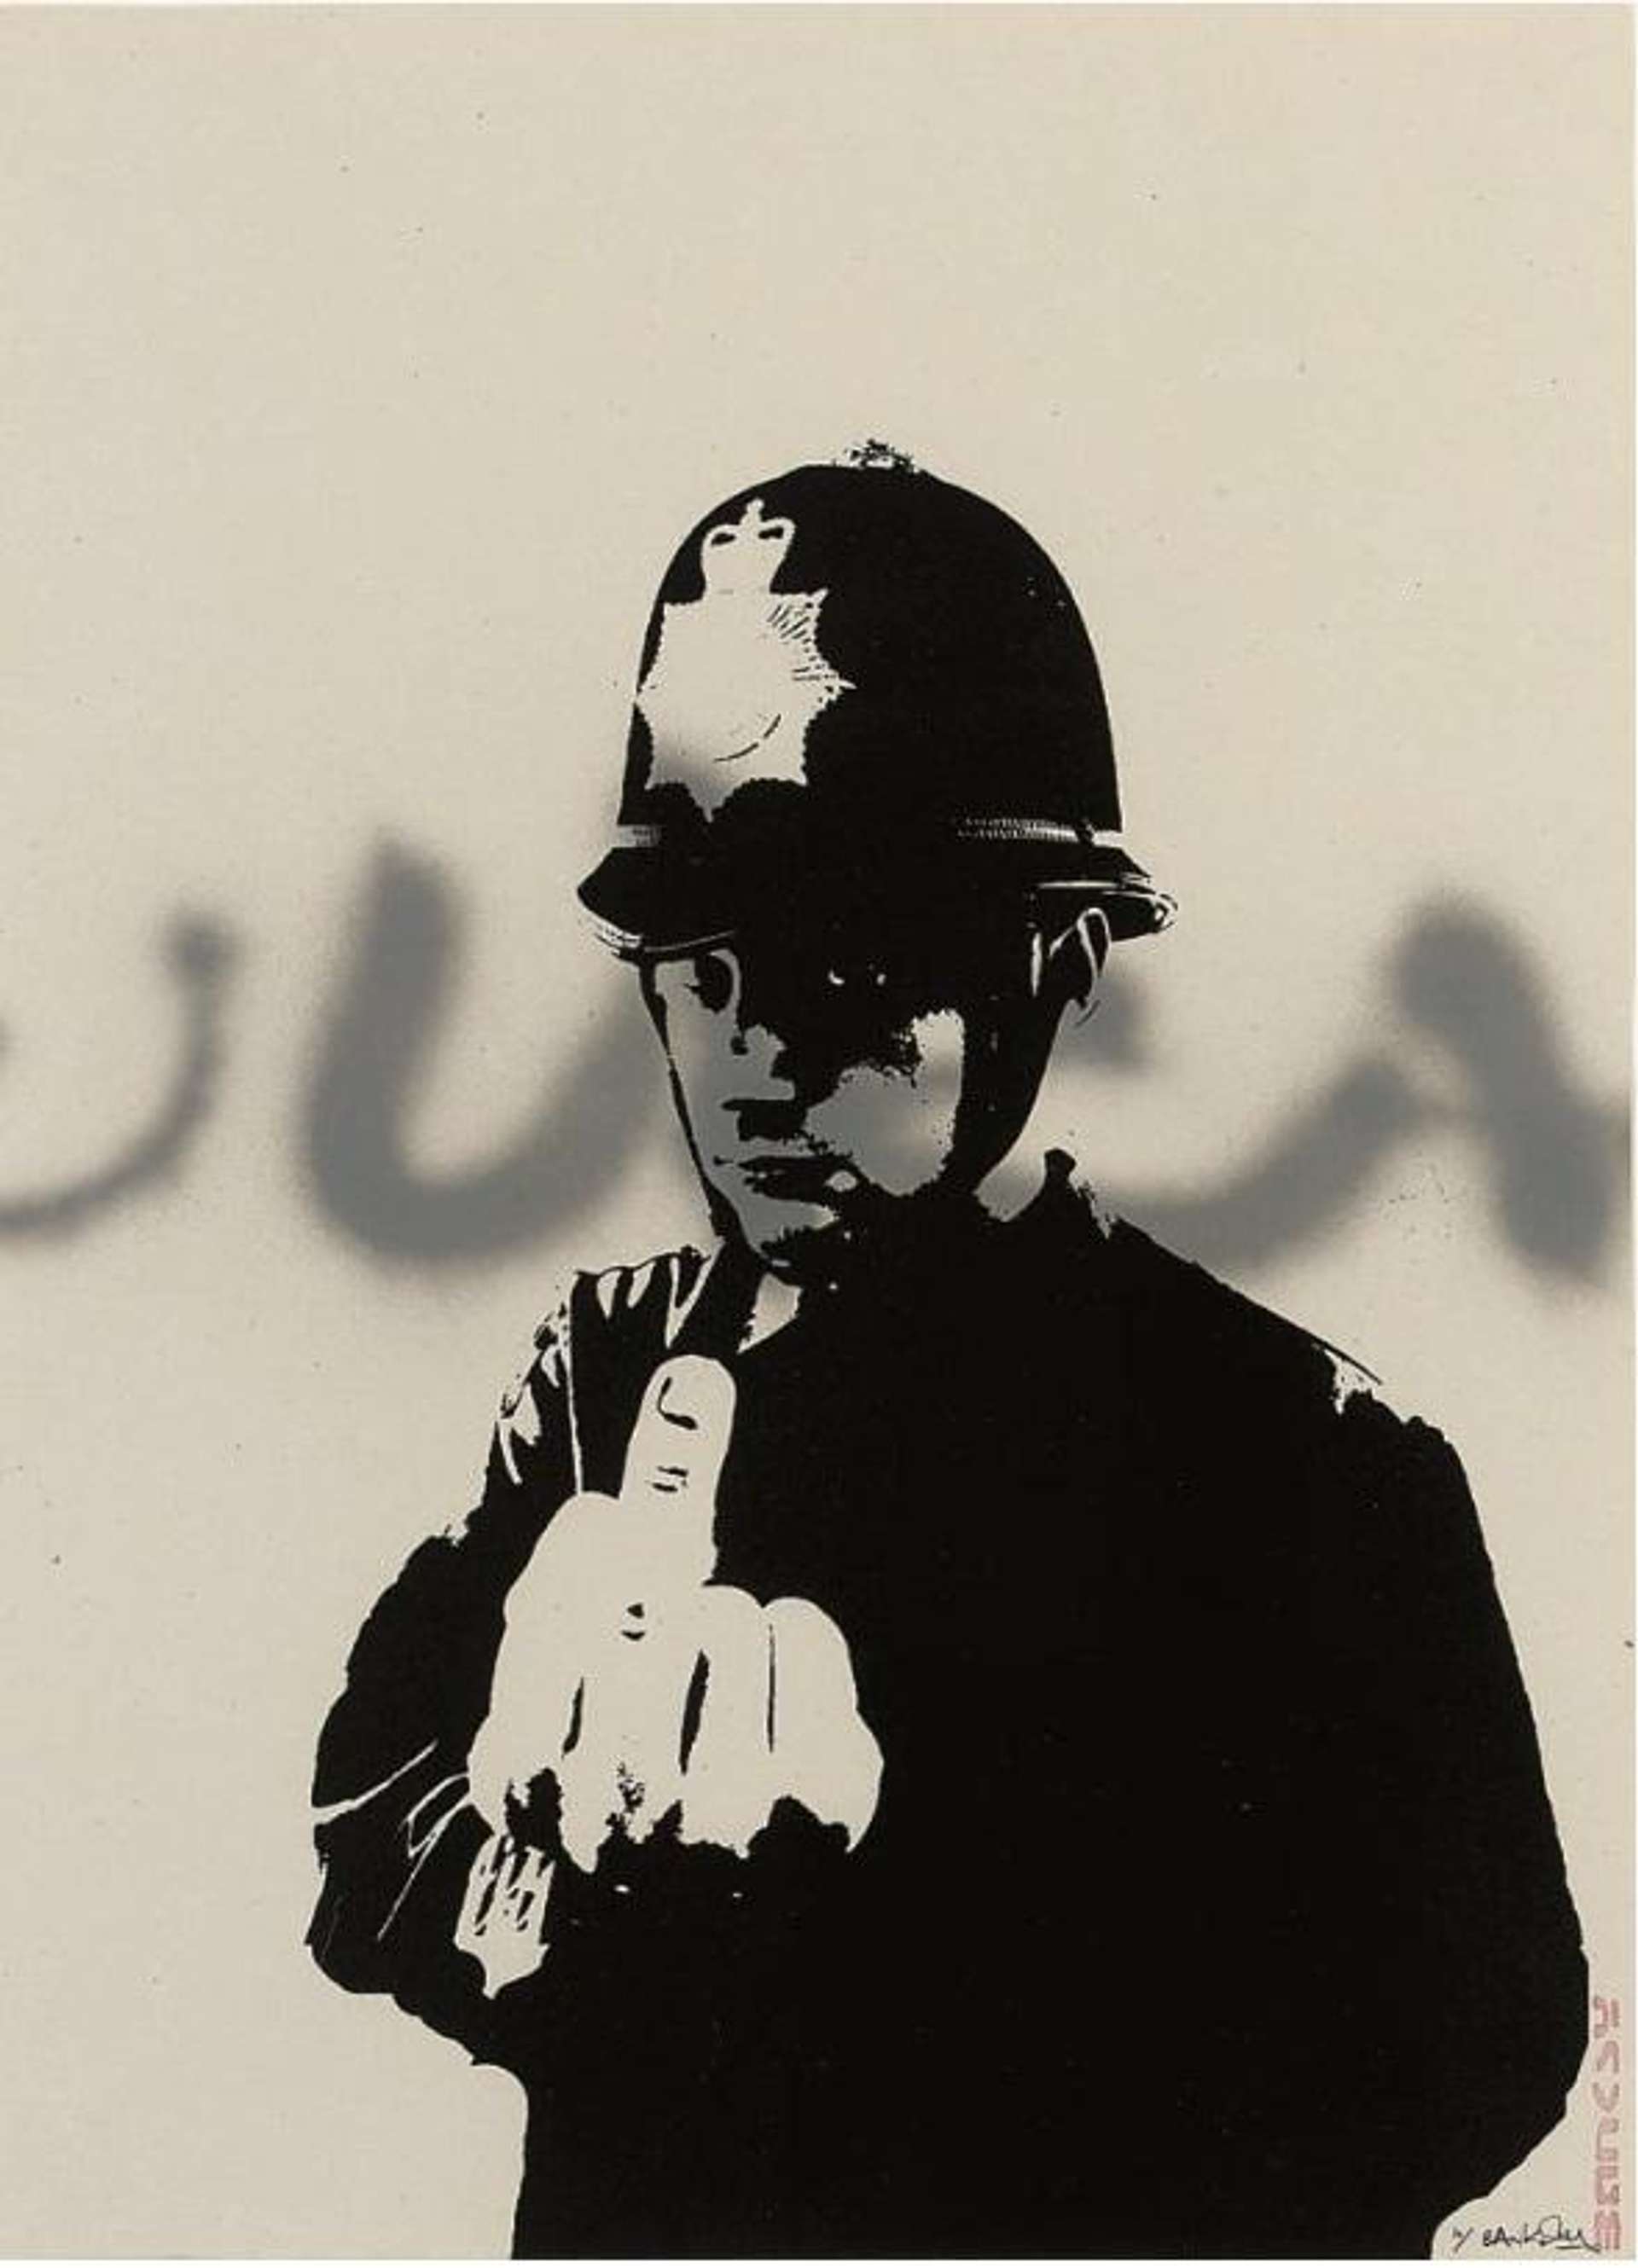 A hand finished screenprint by Banksy depicting a British policeman flipping off the viewer, with letters sprayed over the printed image